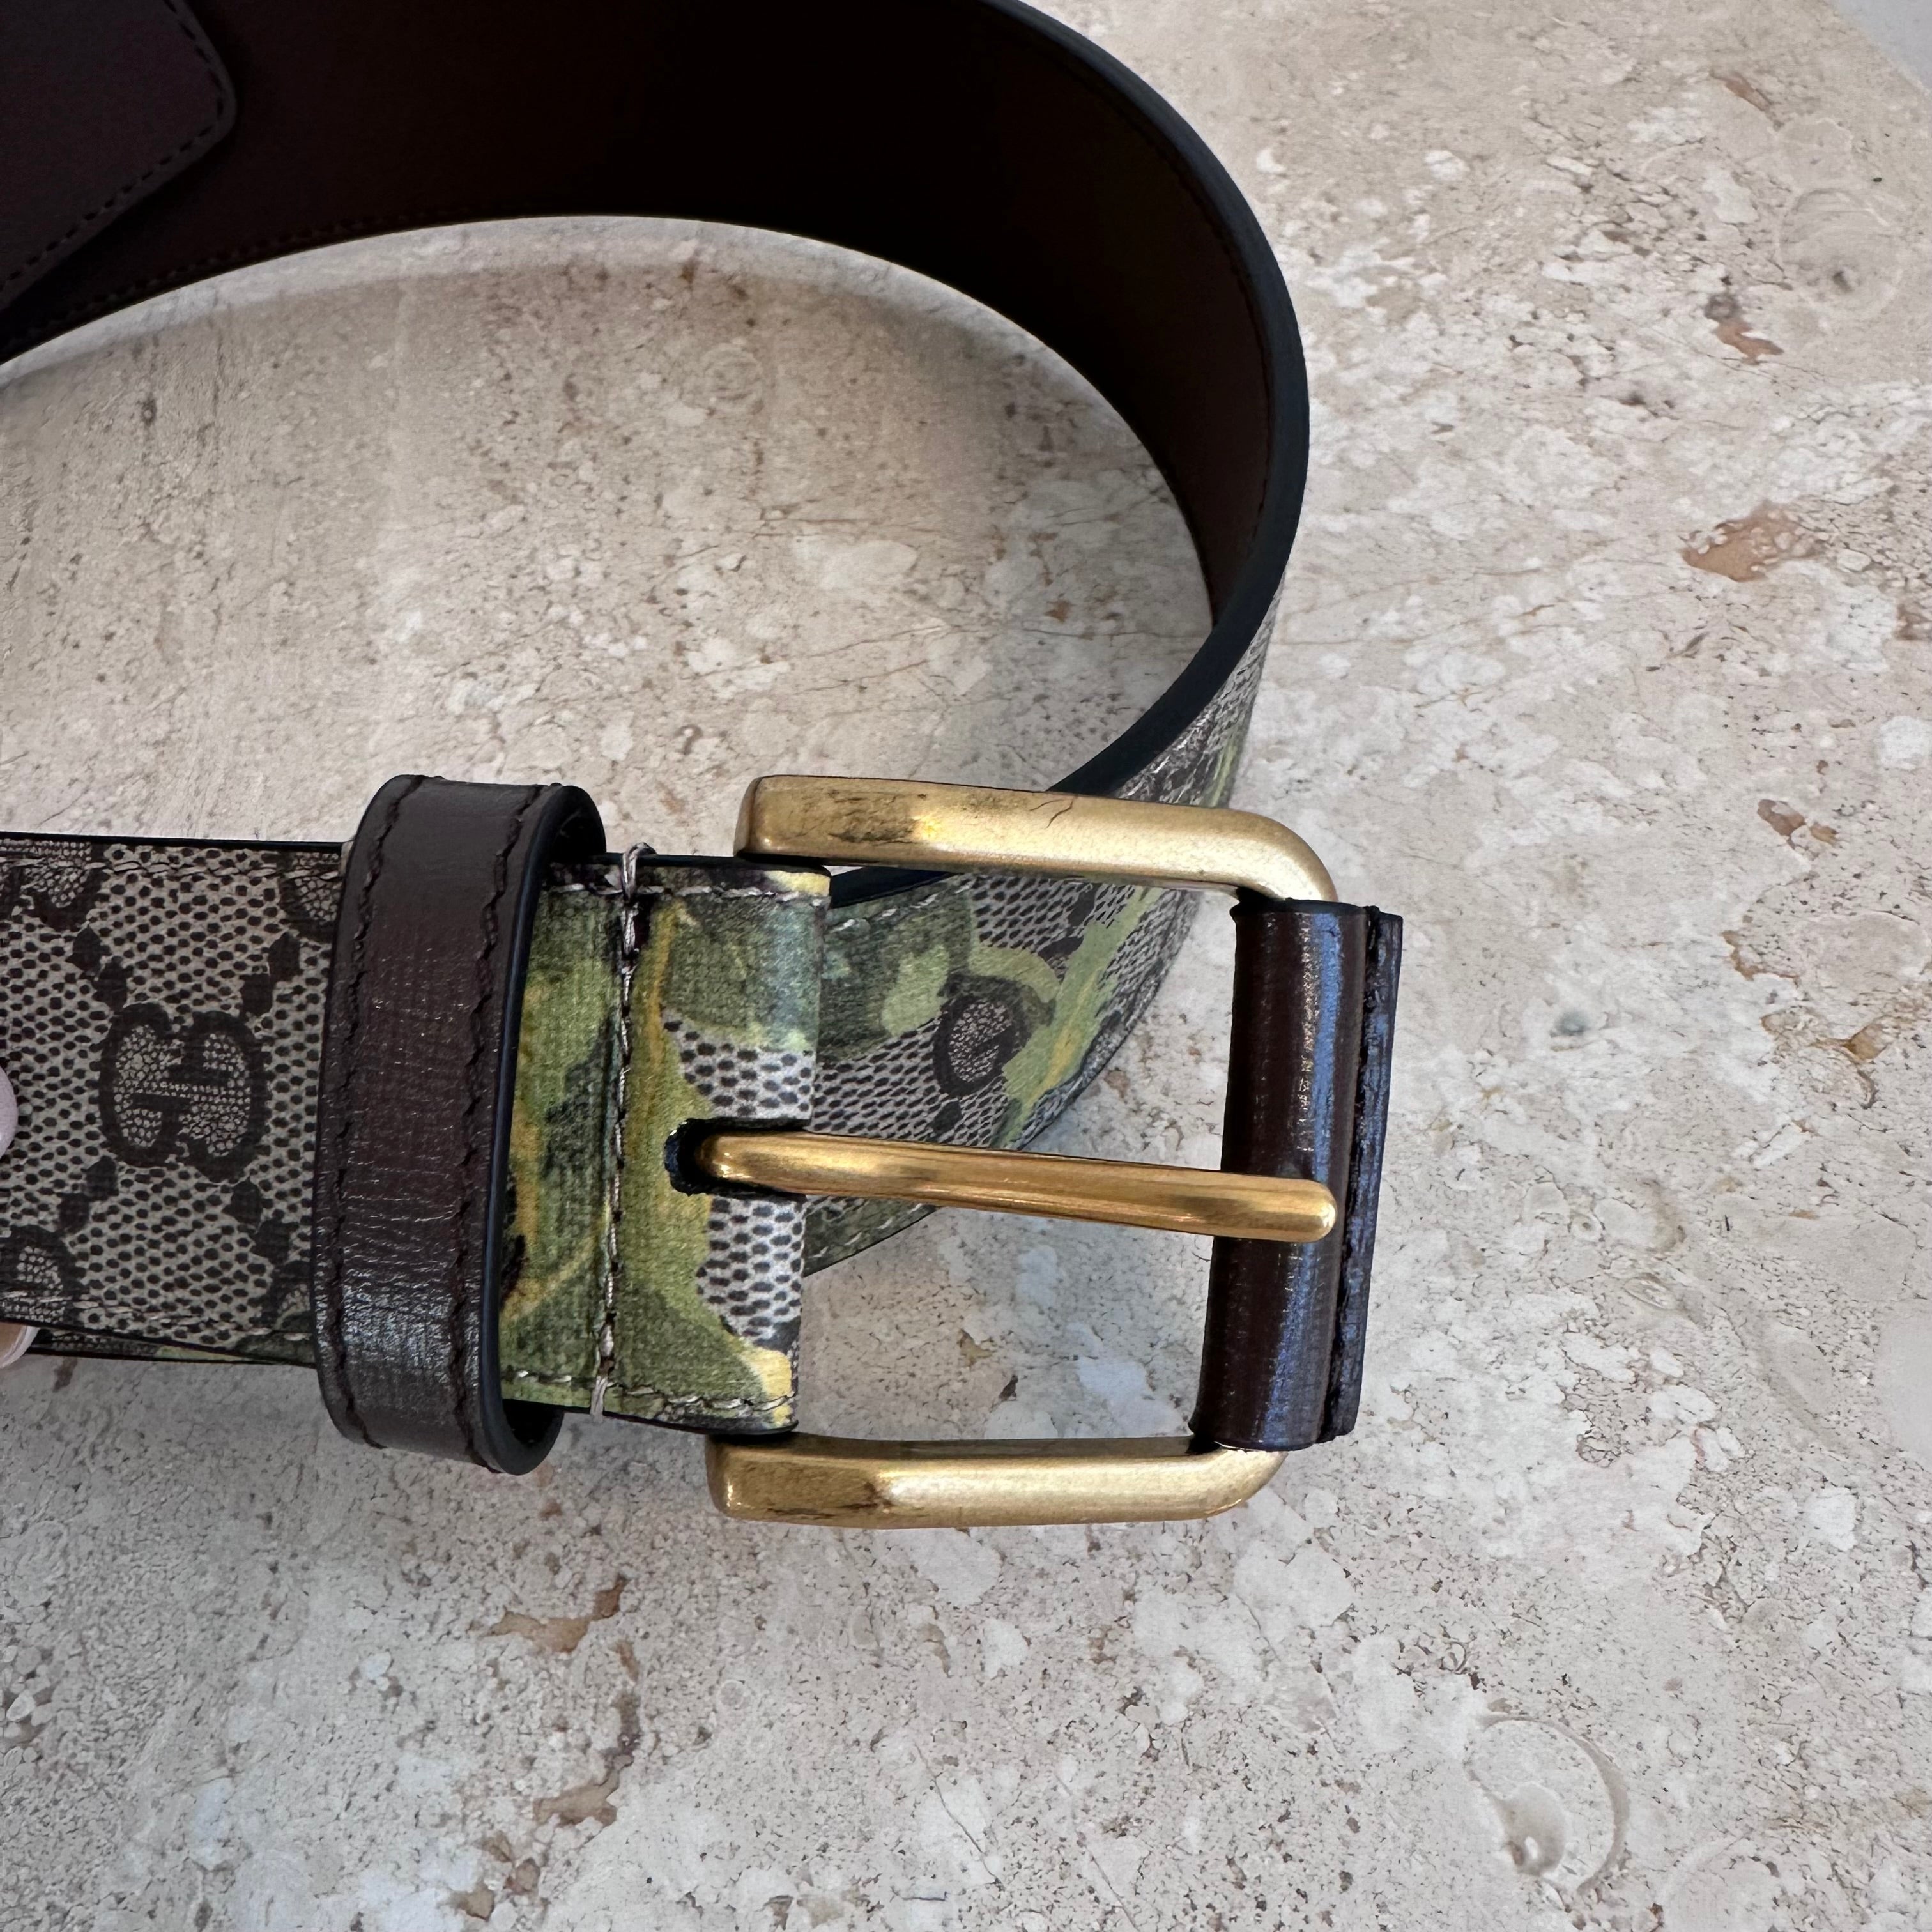 Pre-Owned GUCCI Flora Belt Size 80/32